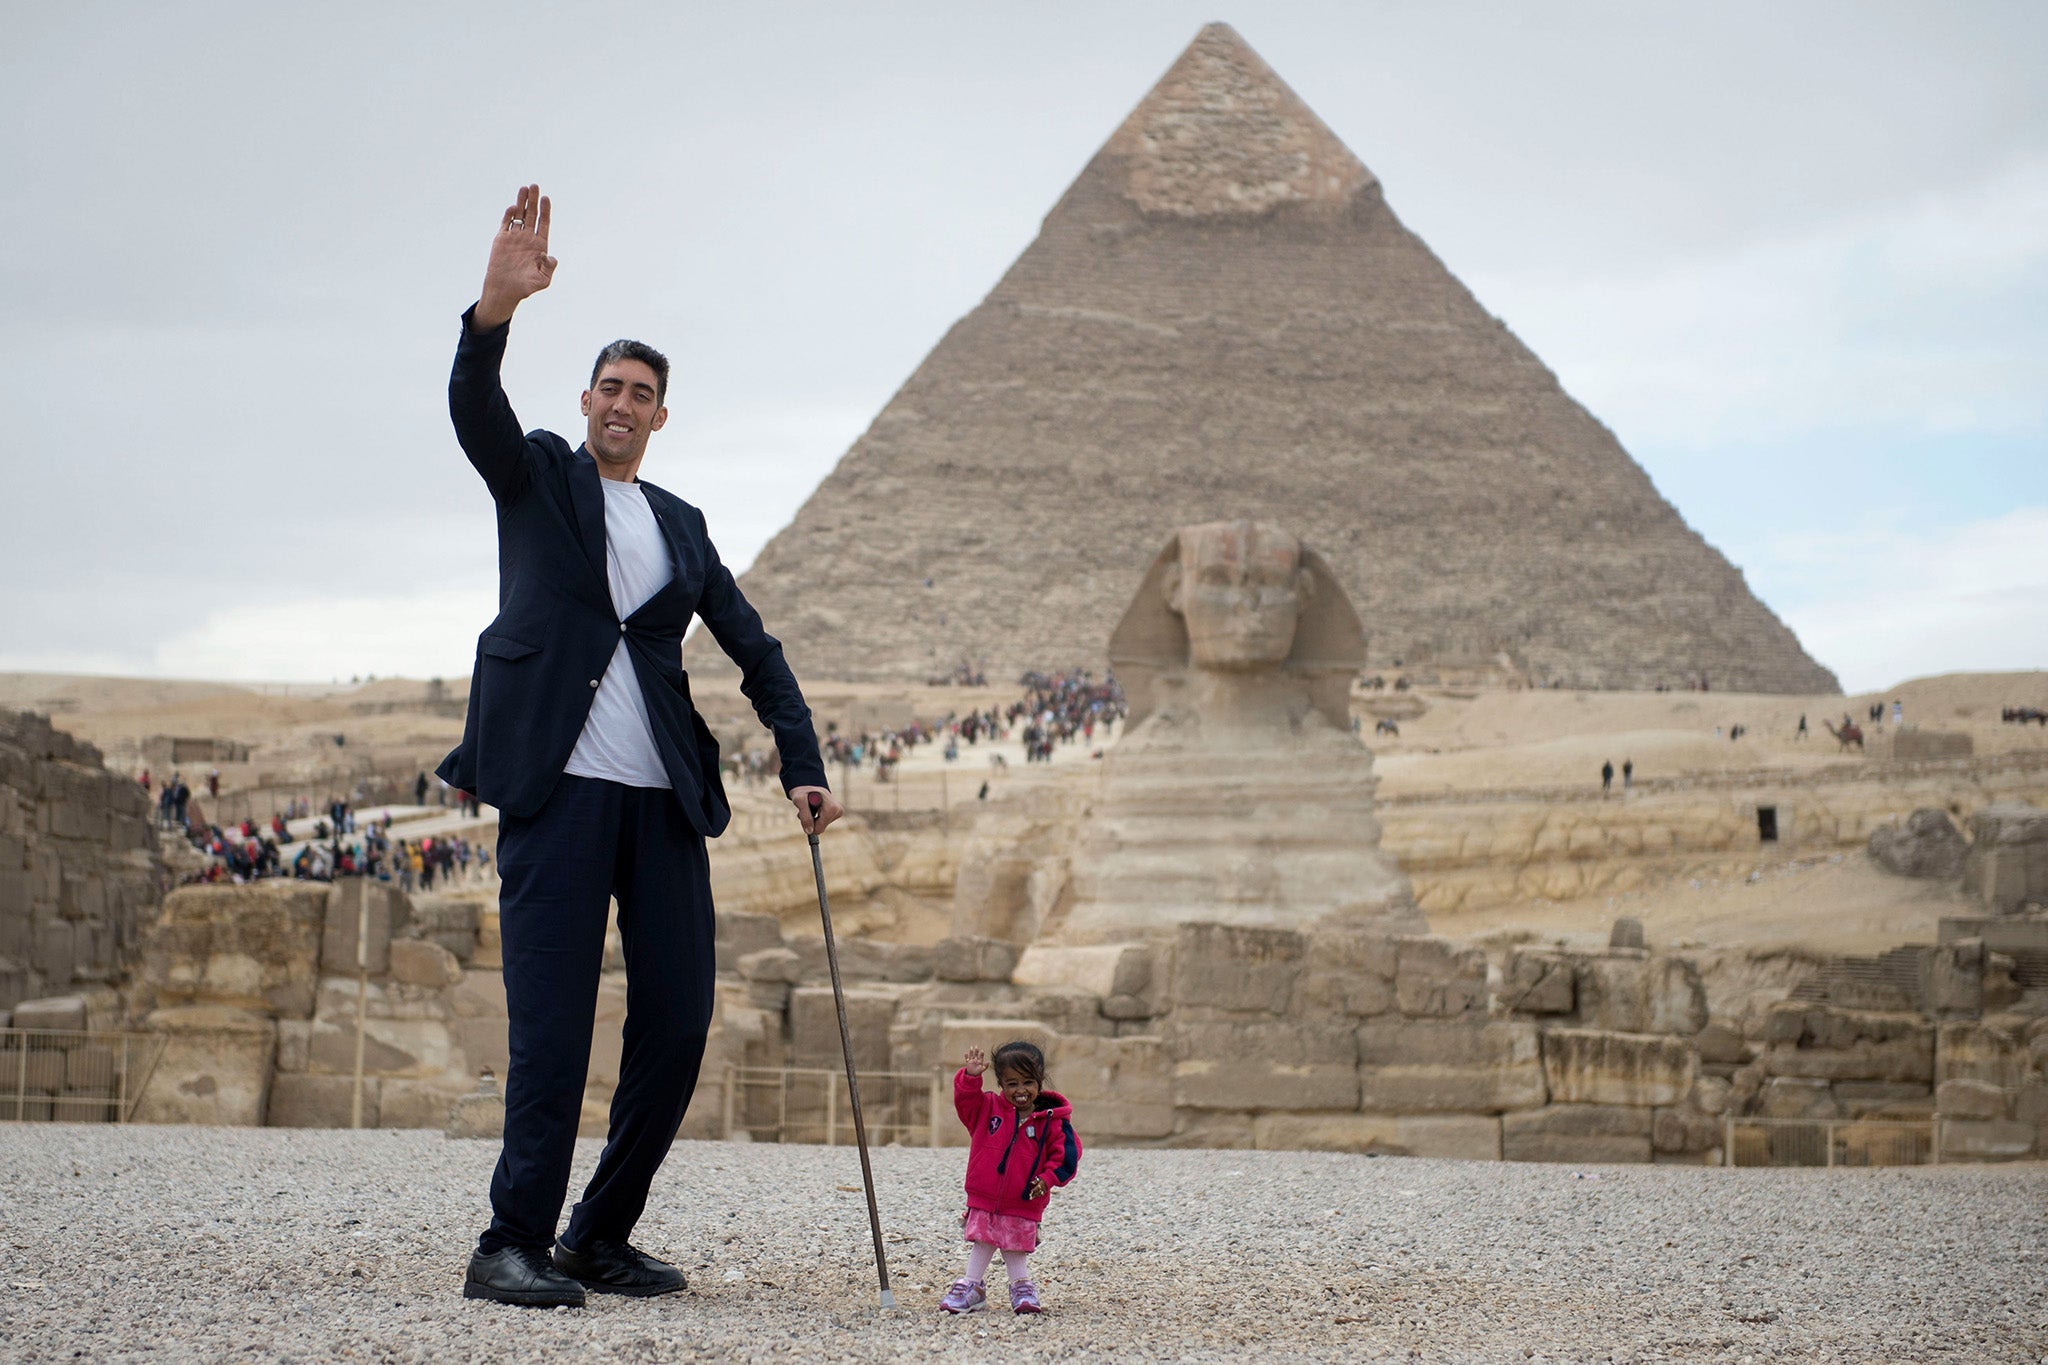 Kosen and Amge first met six years ago in 2018 when they posed next to the Great Sphinx of Giza